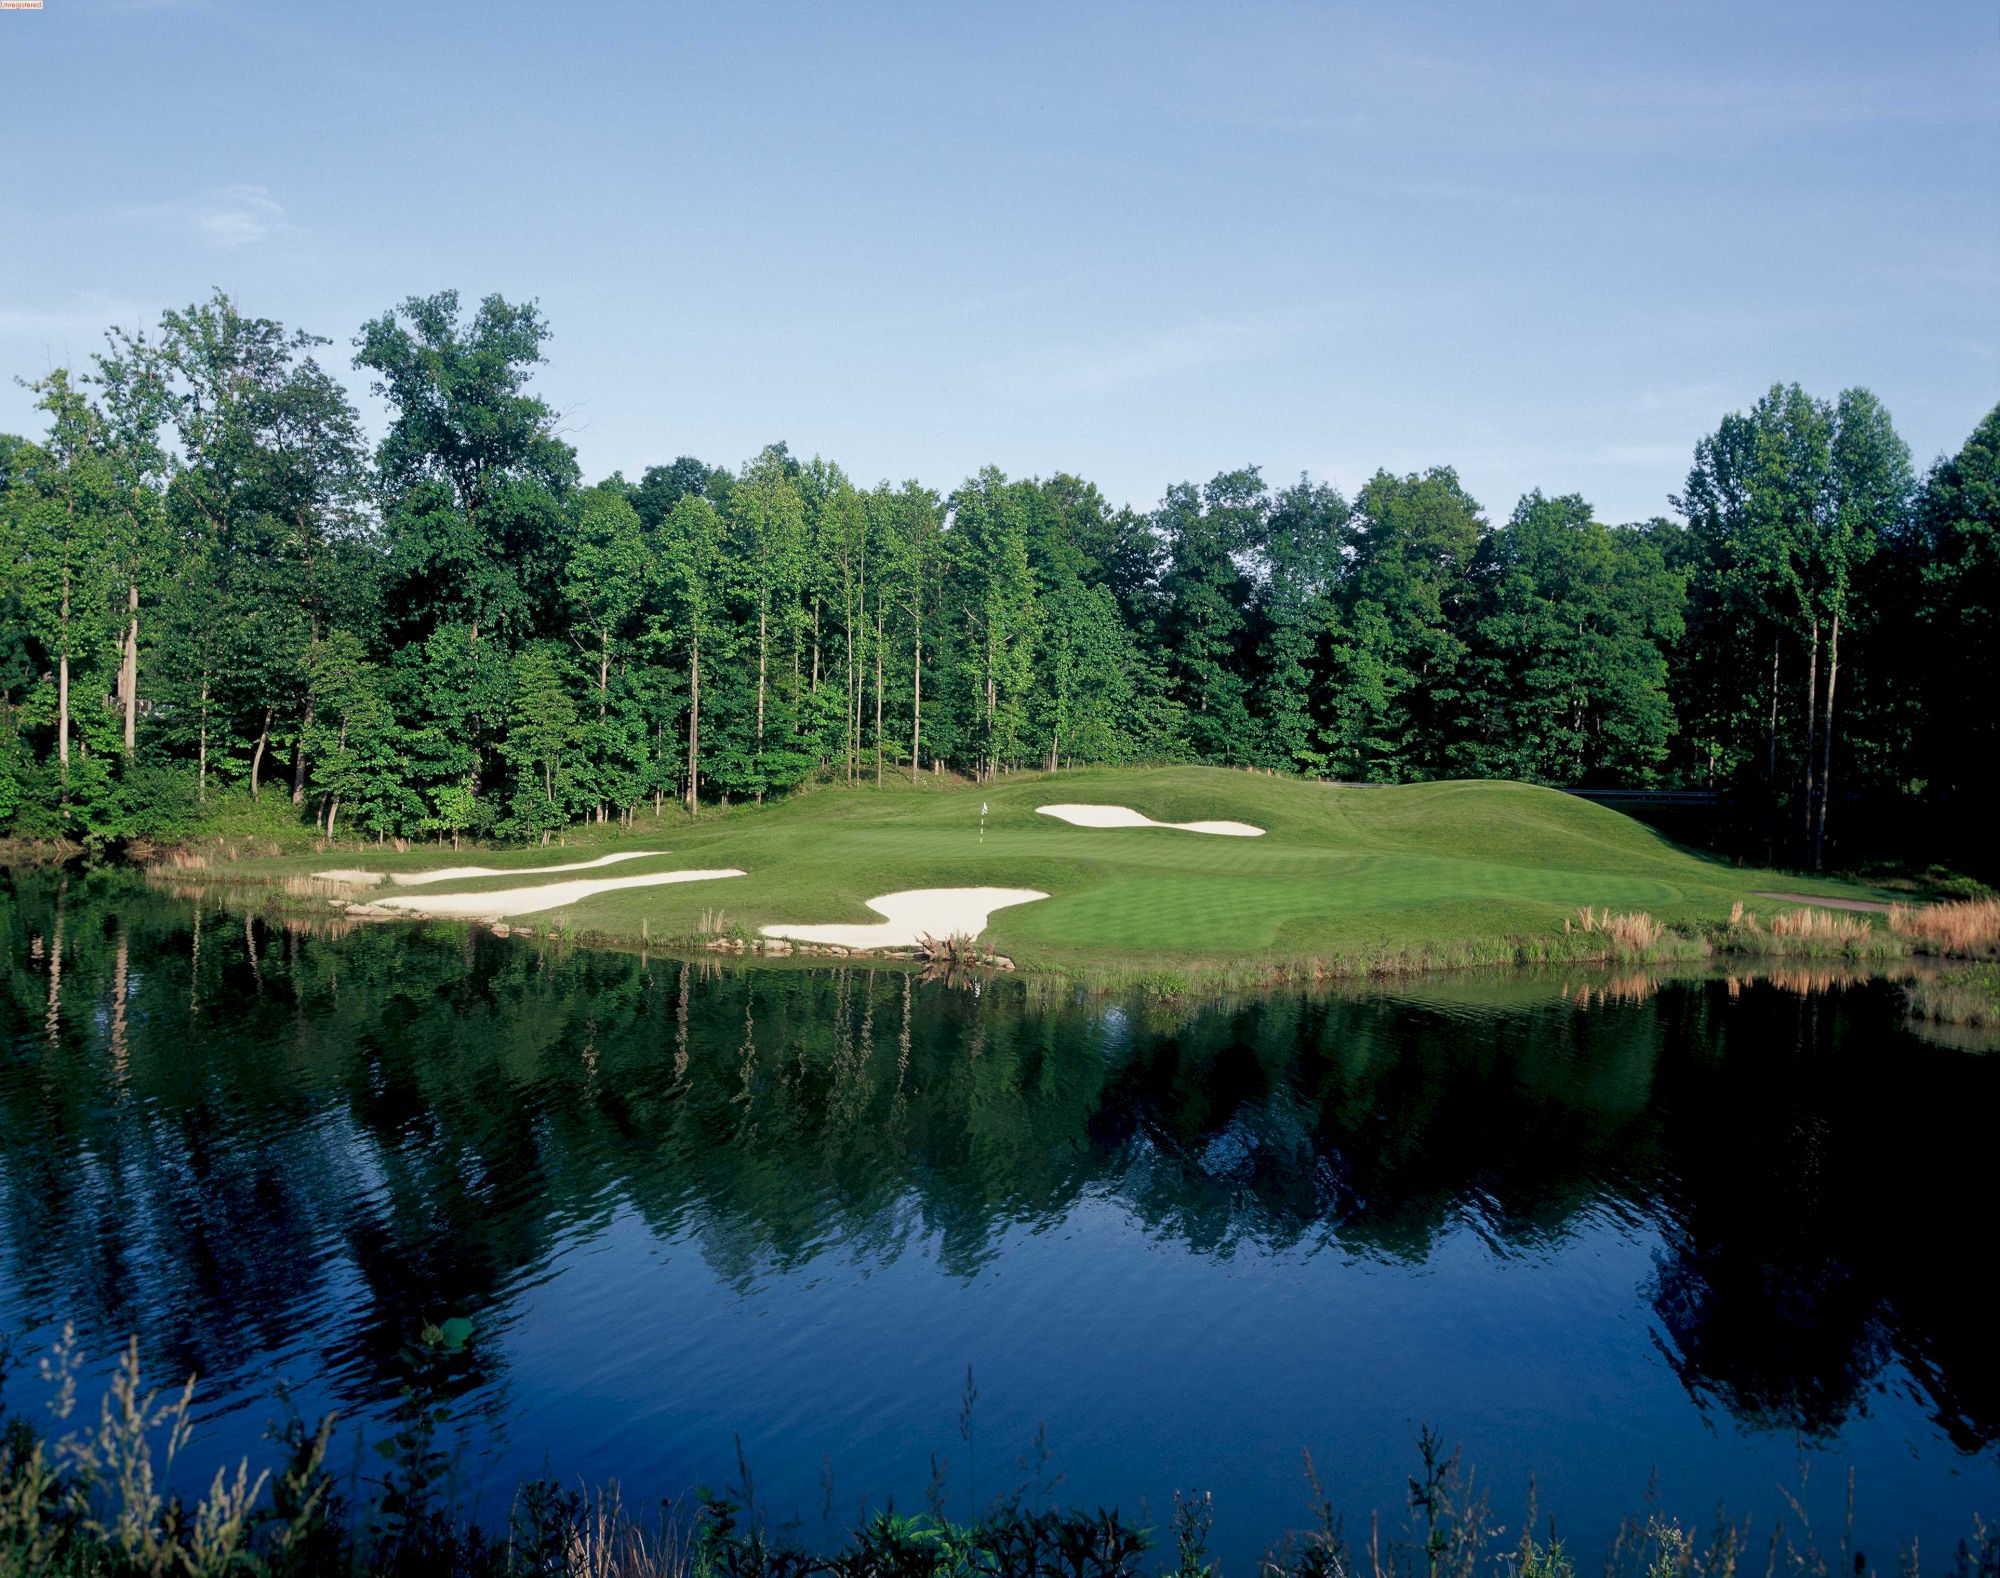 A serene golf course with green fairways and sand hazards is reflected in a calm lake, surrounded by a forest with clear blue skies above.